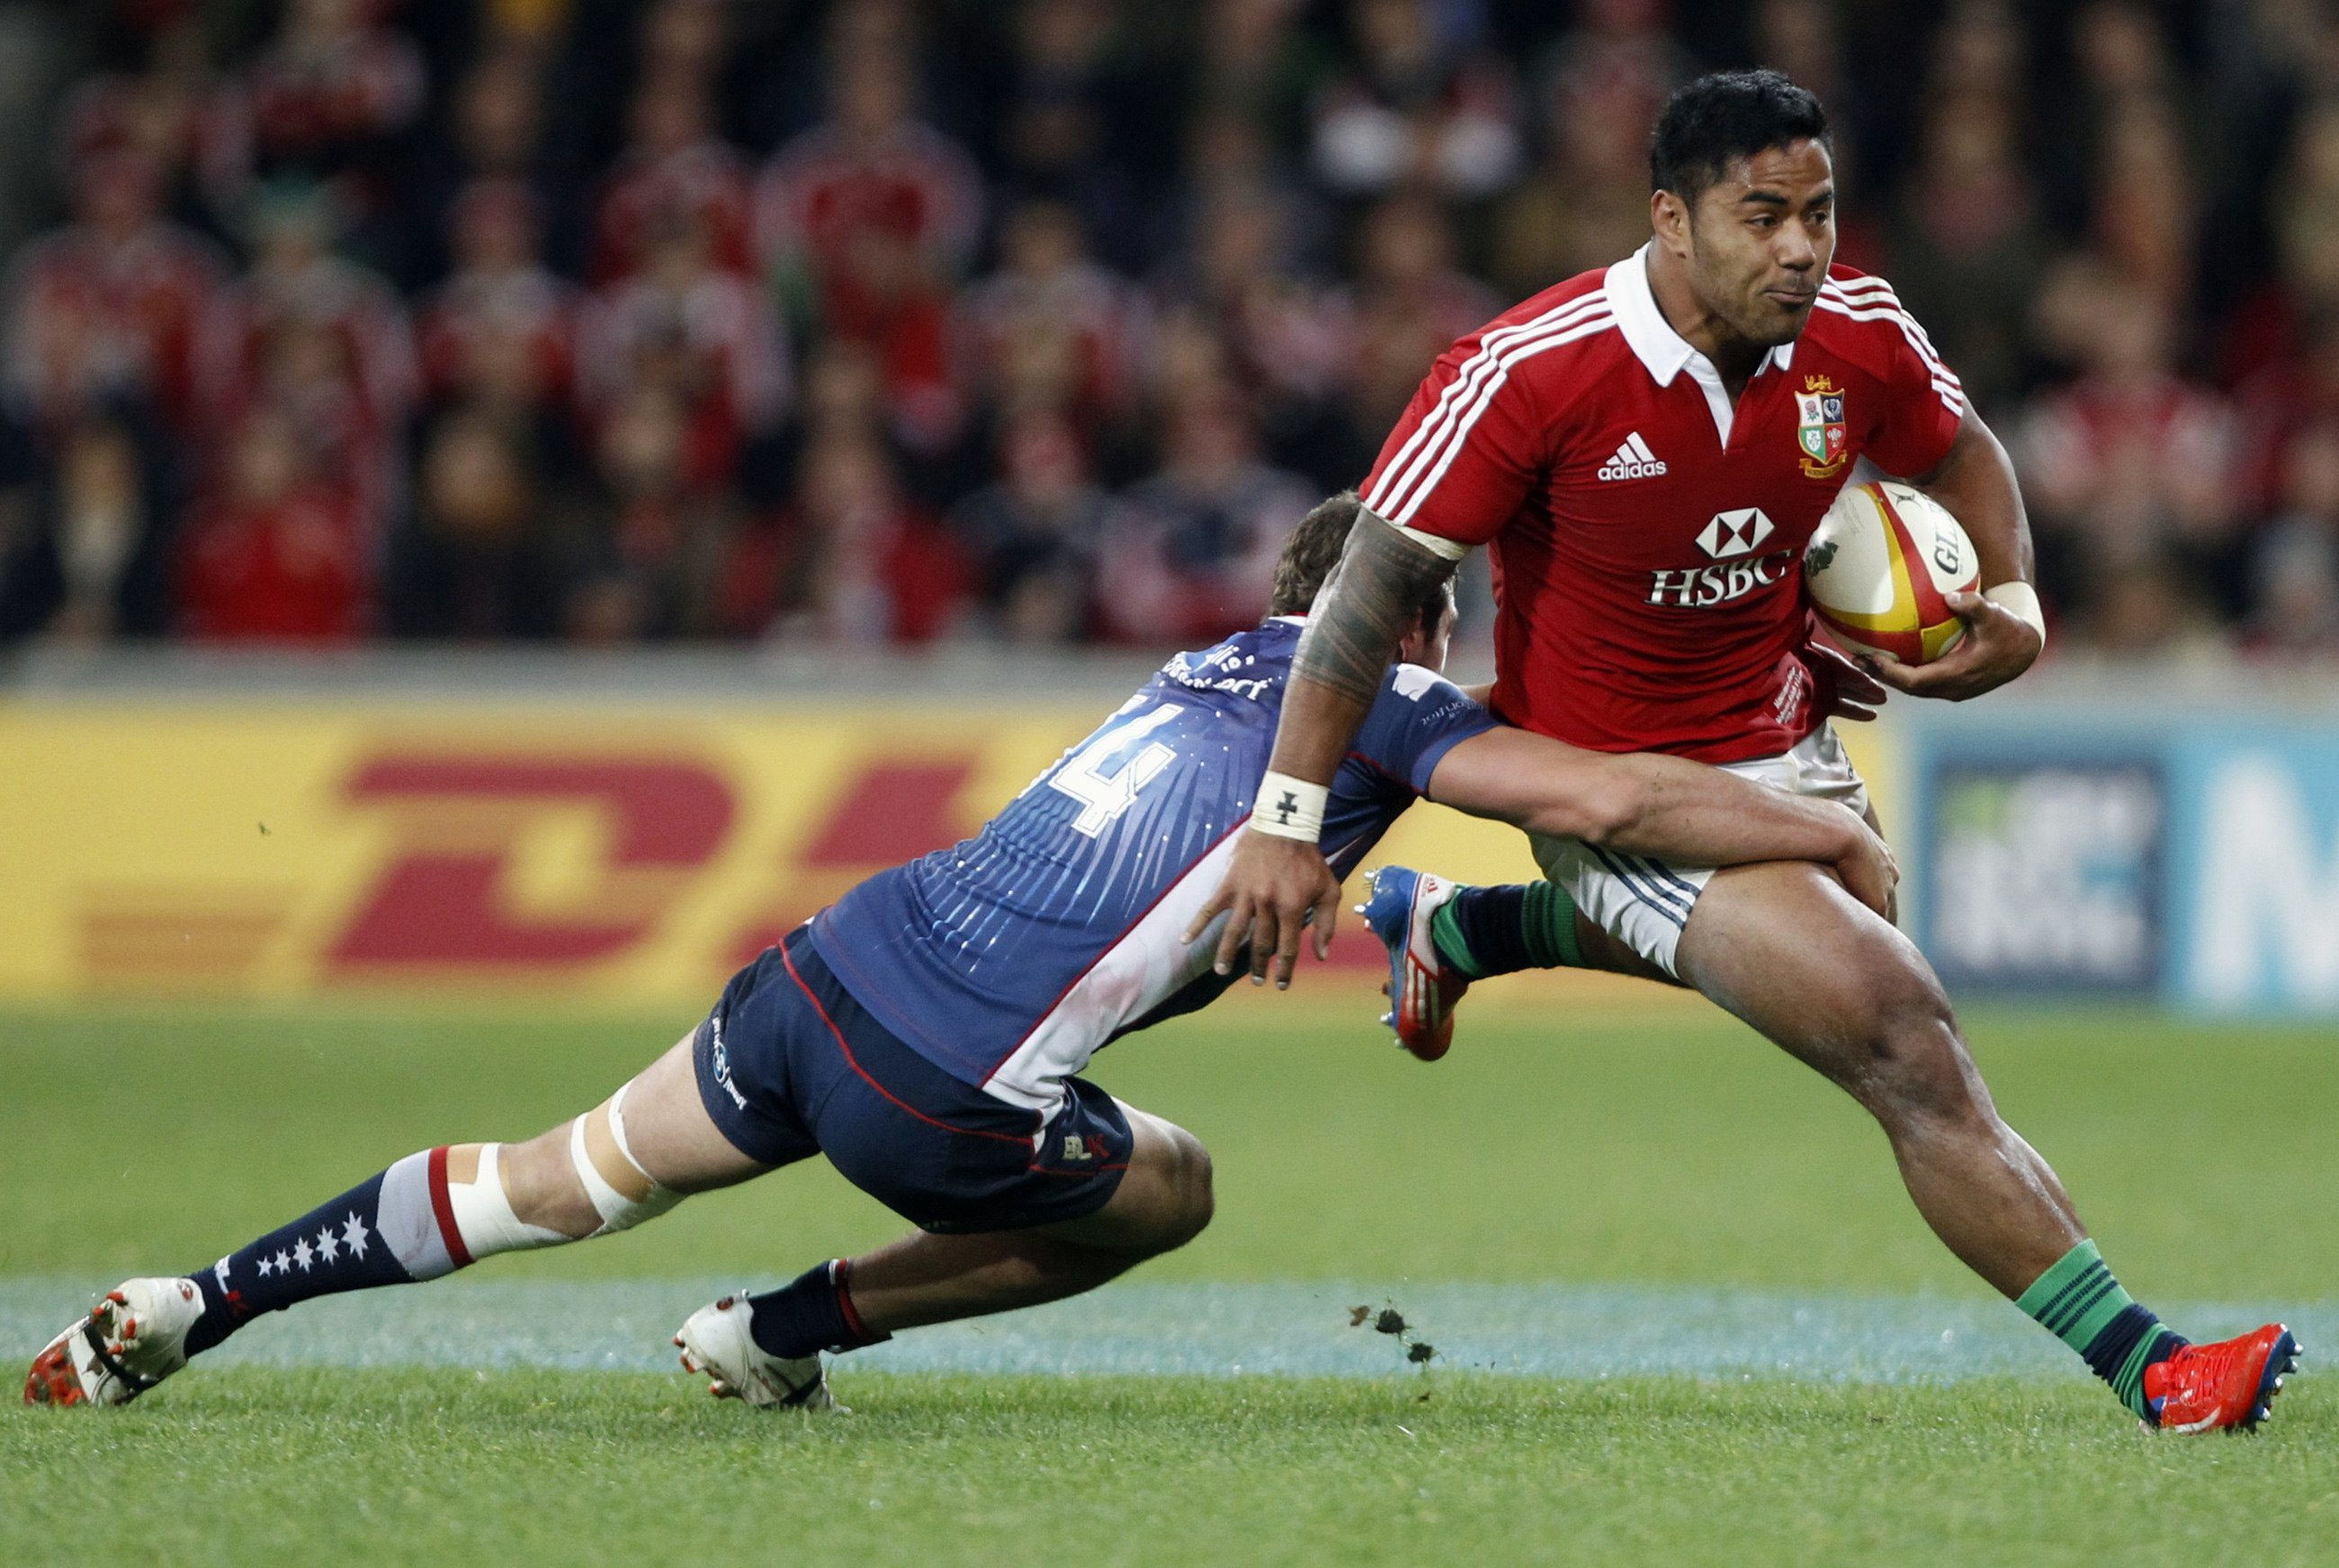 Manu Tuilagi, who played for the British & Irish Lions in Australia last year, could be on the bench for England’s match against Italy on Saturday. Photo: Reuters